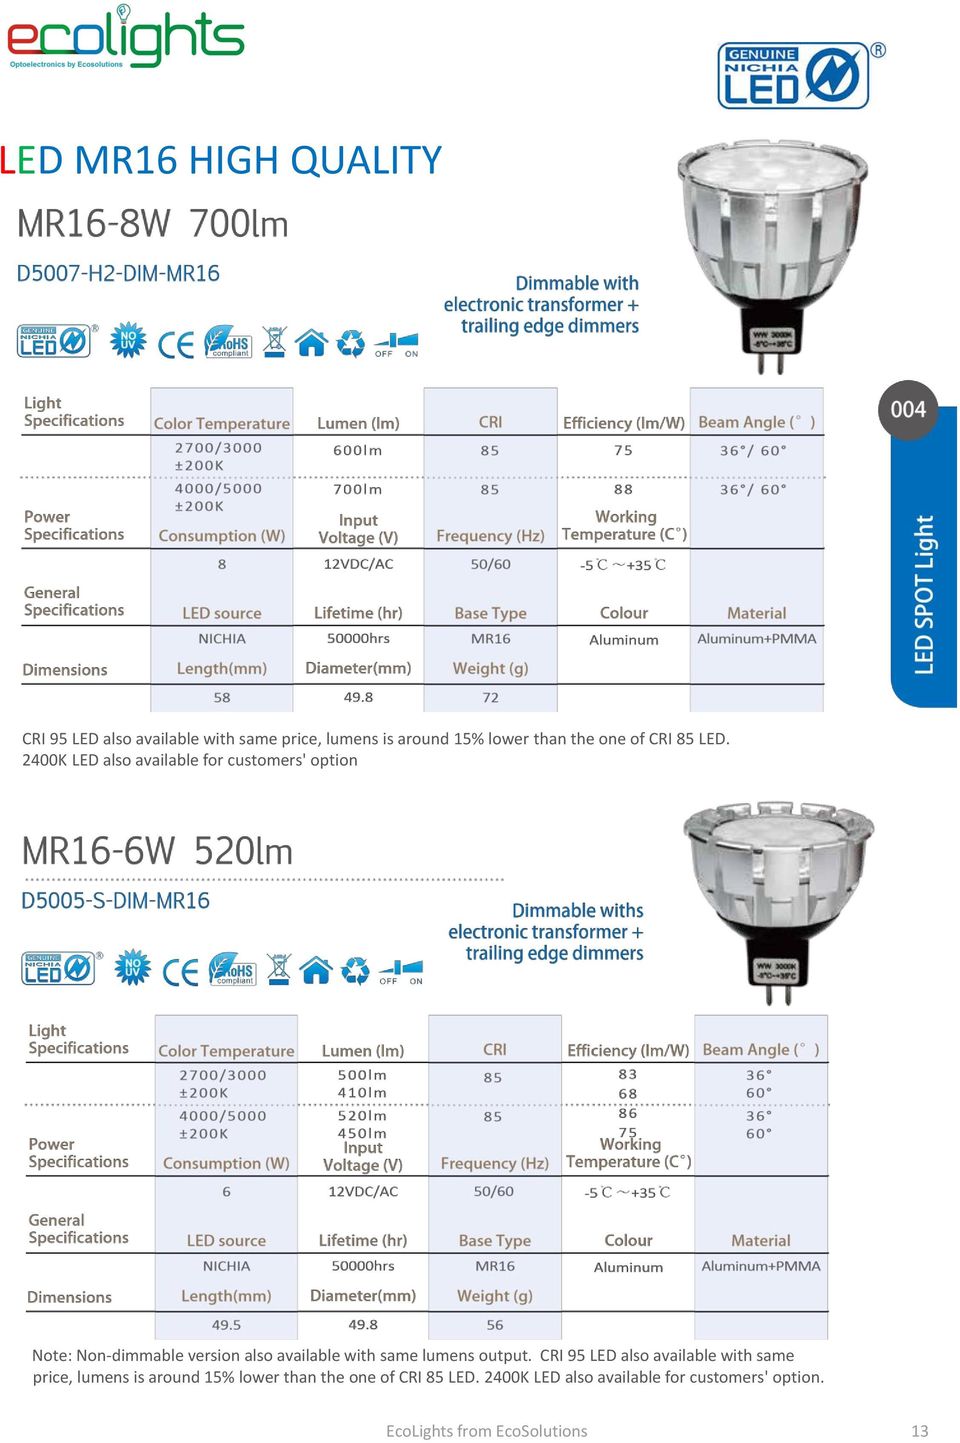 2400K LED also available for customers' option Note: Non-dimmable version also available with same